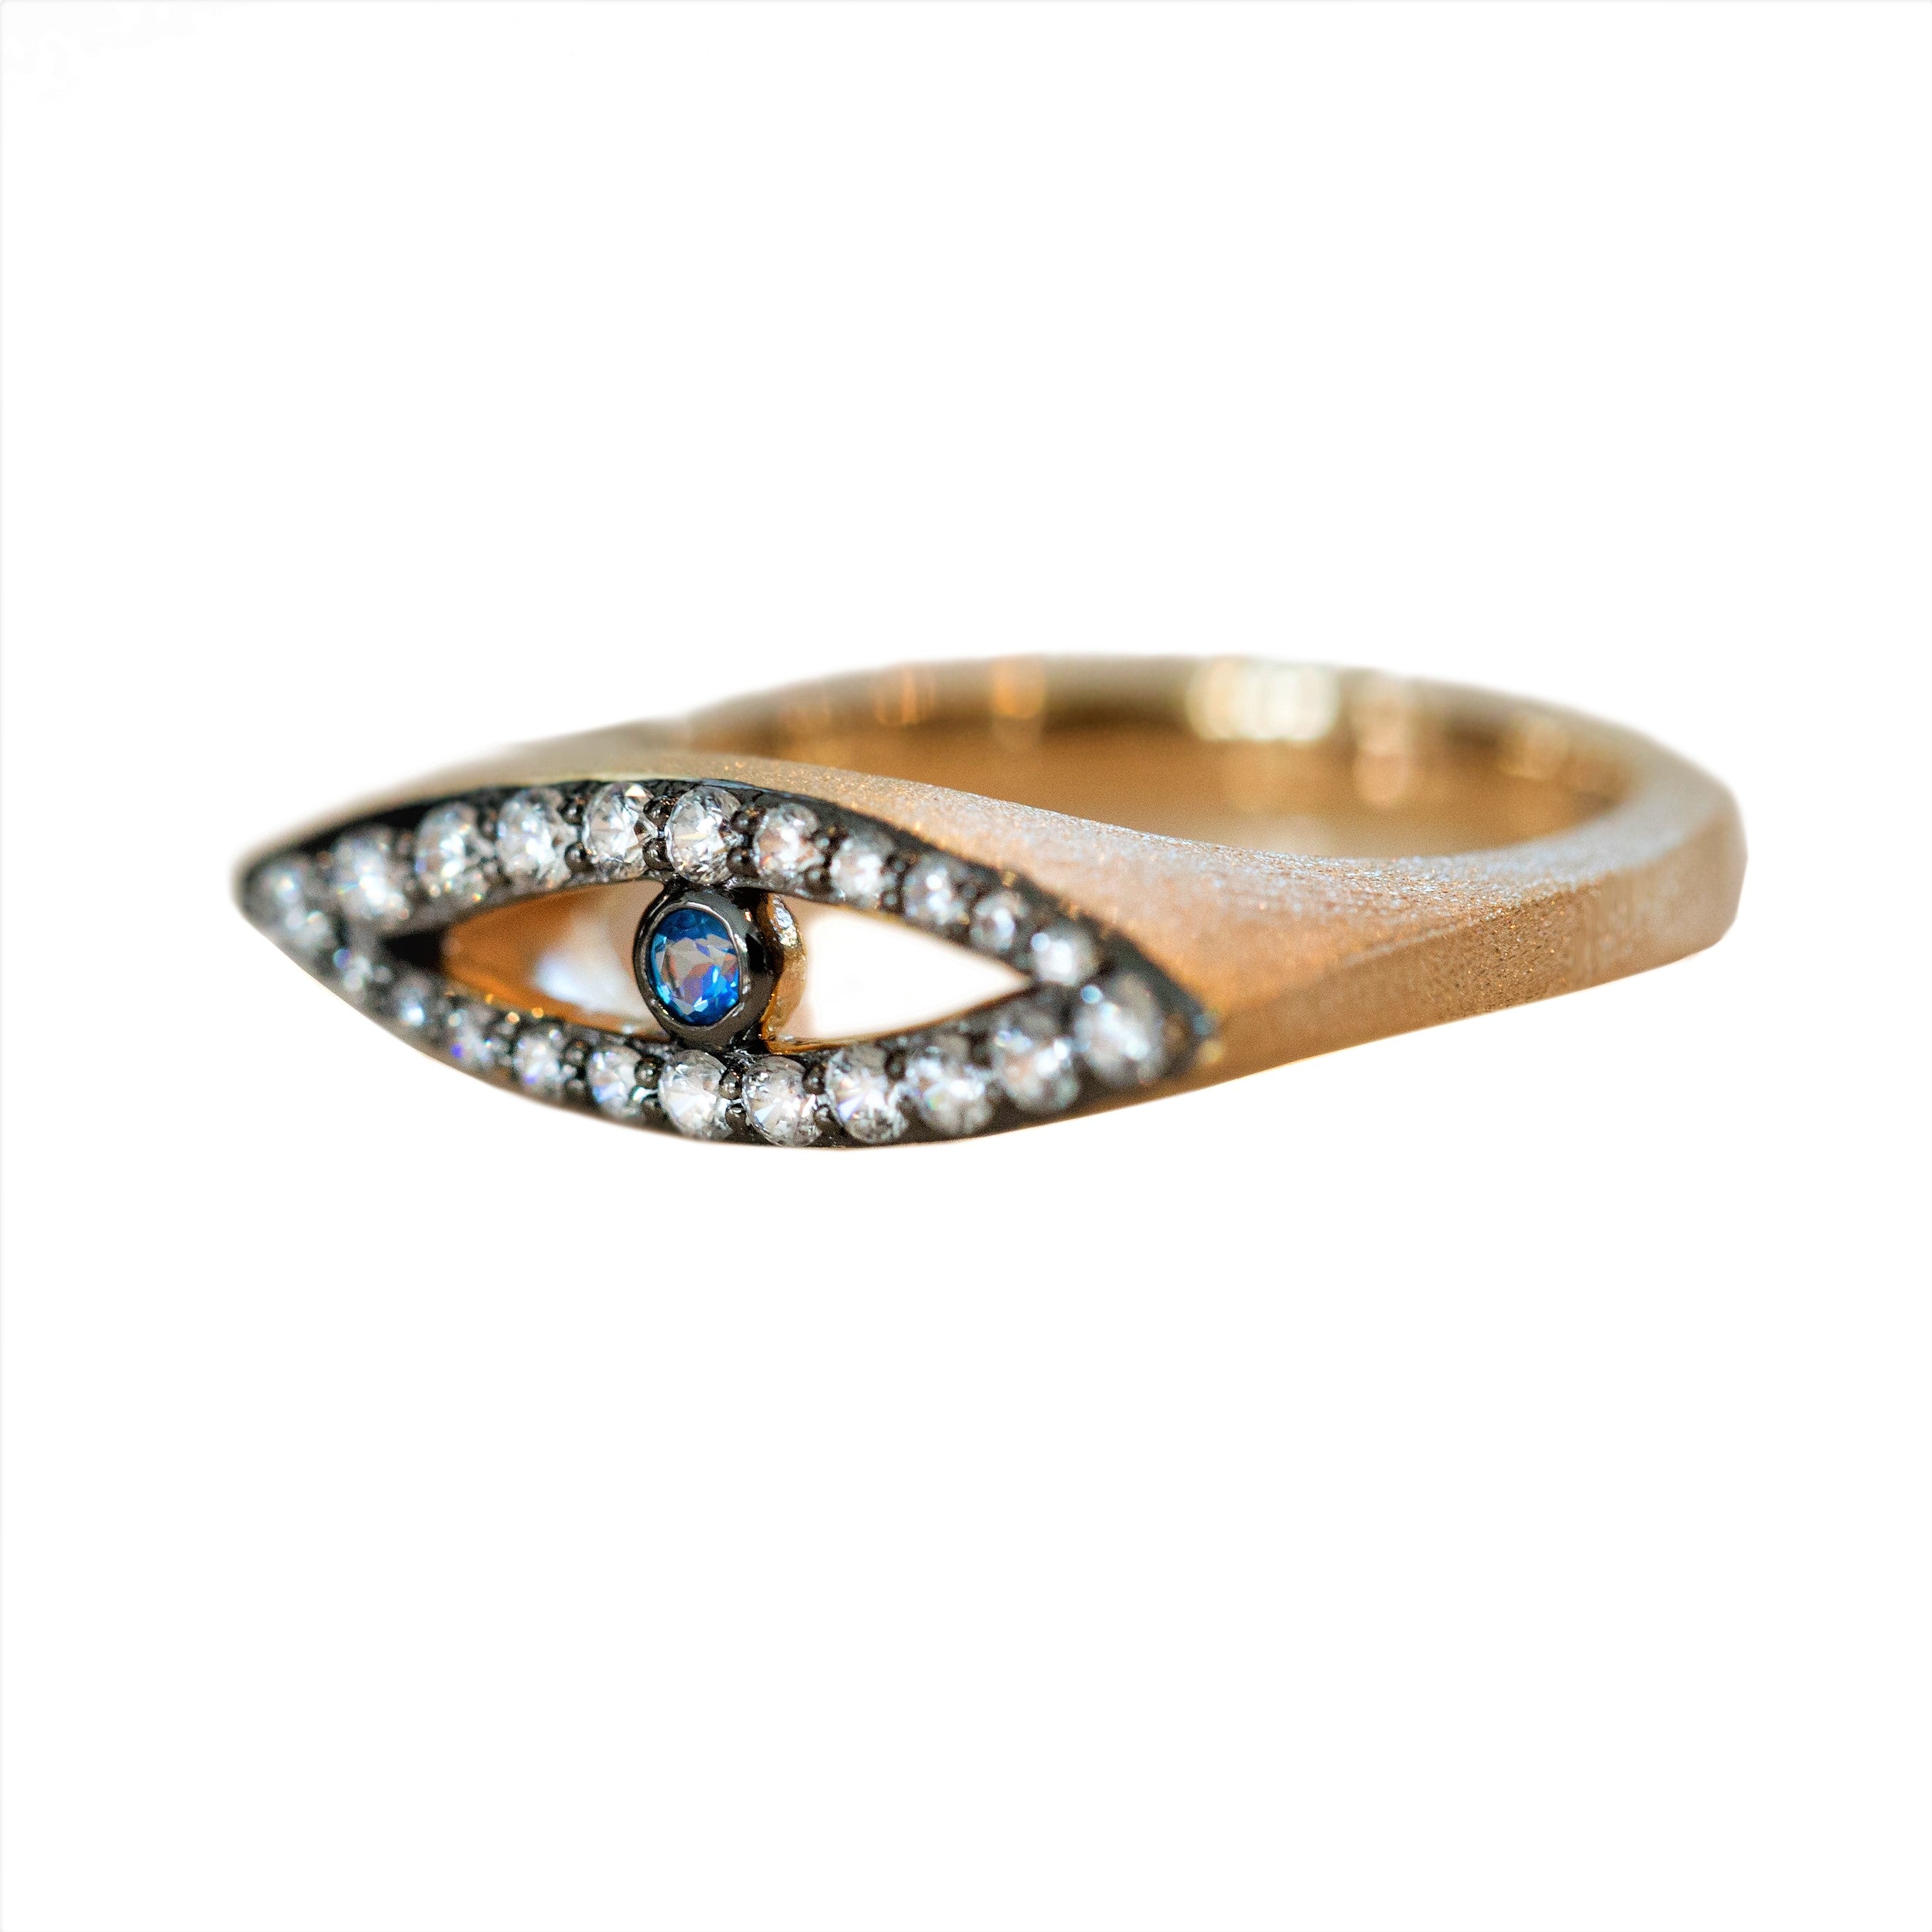 The Protective Eye Vermeil Gold Ring - 7